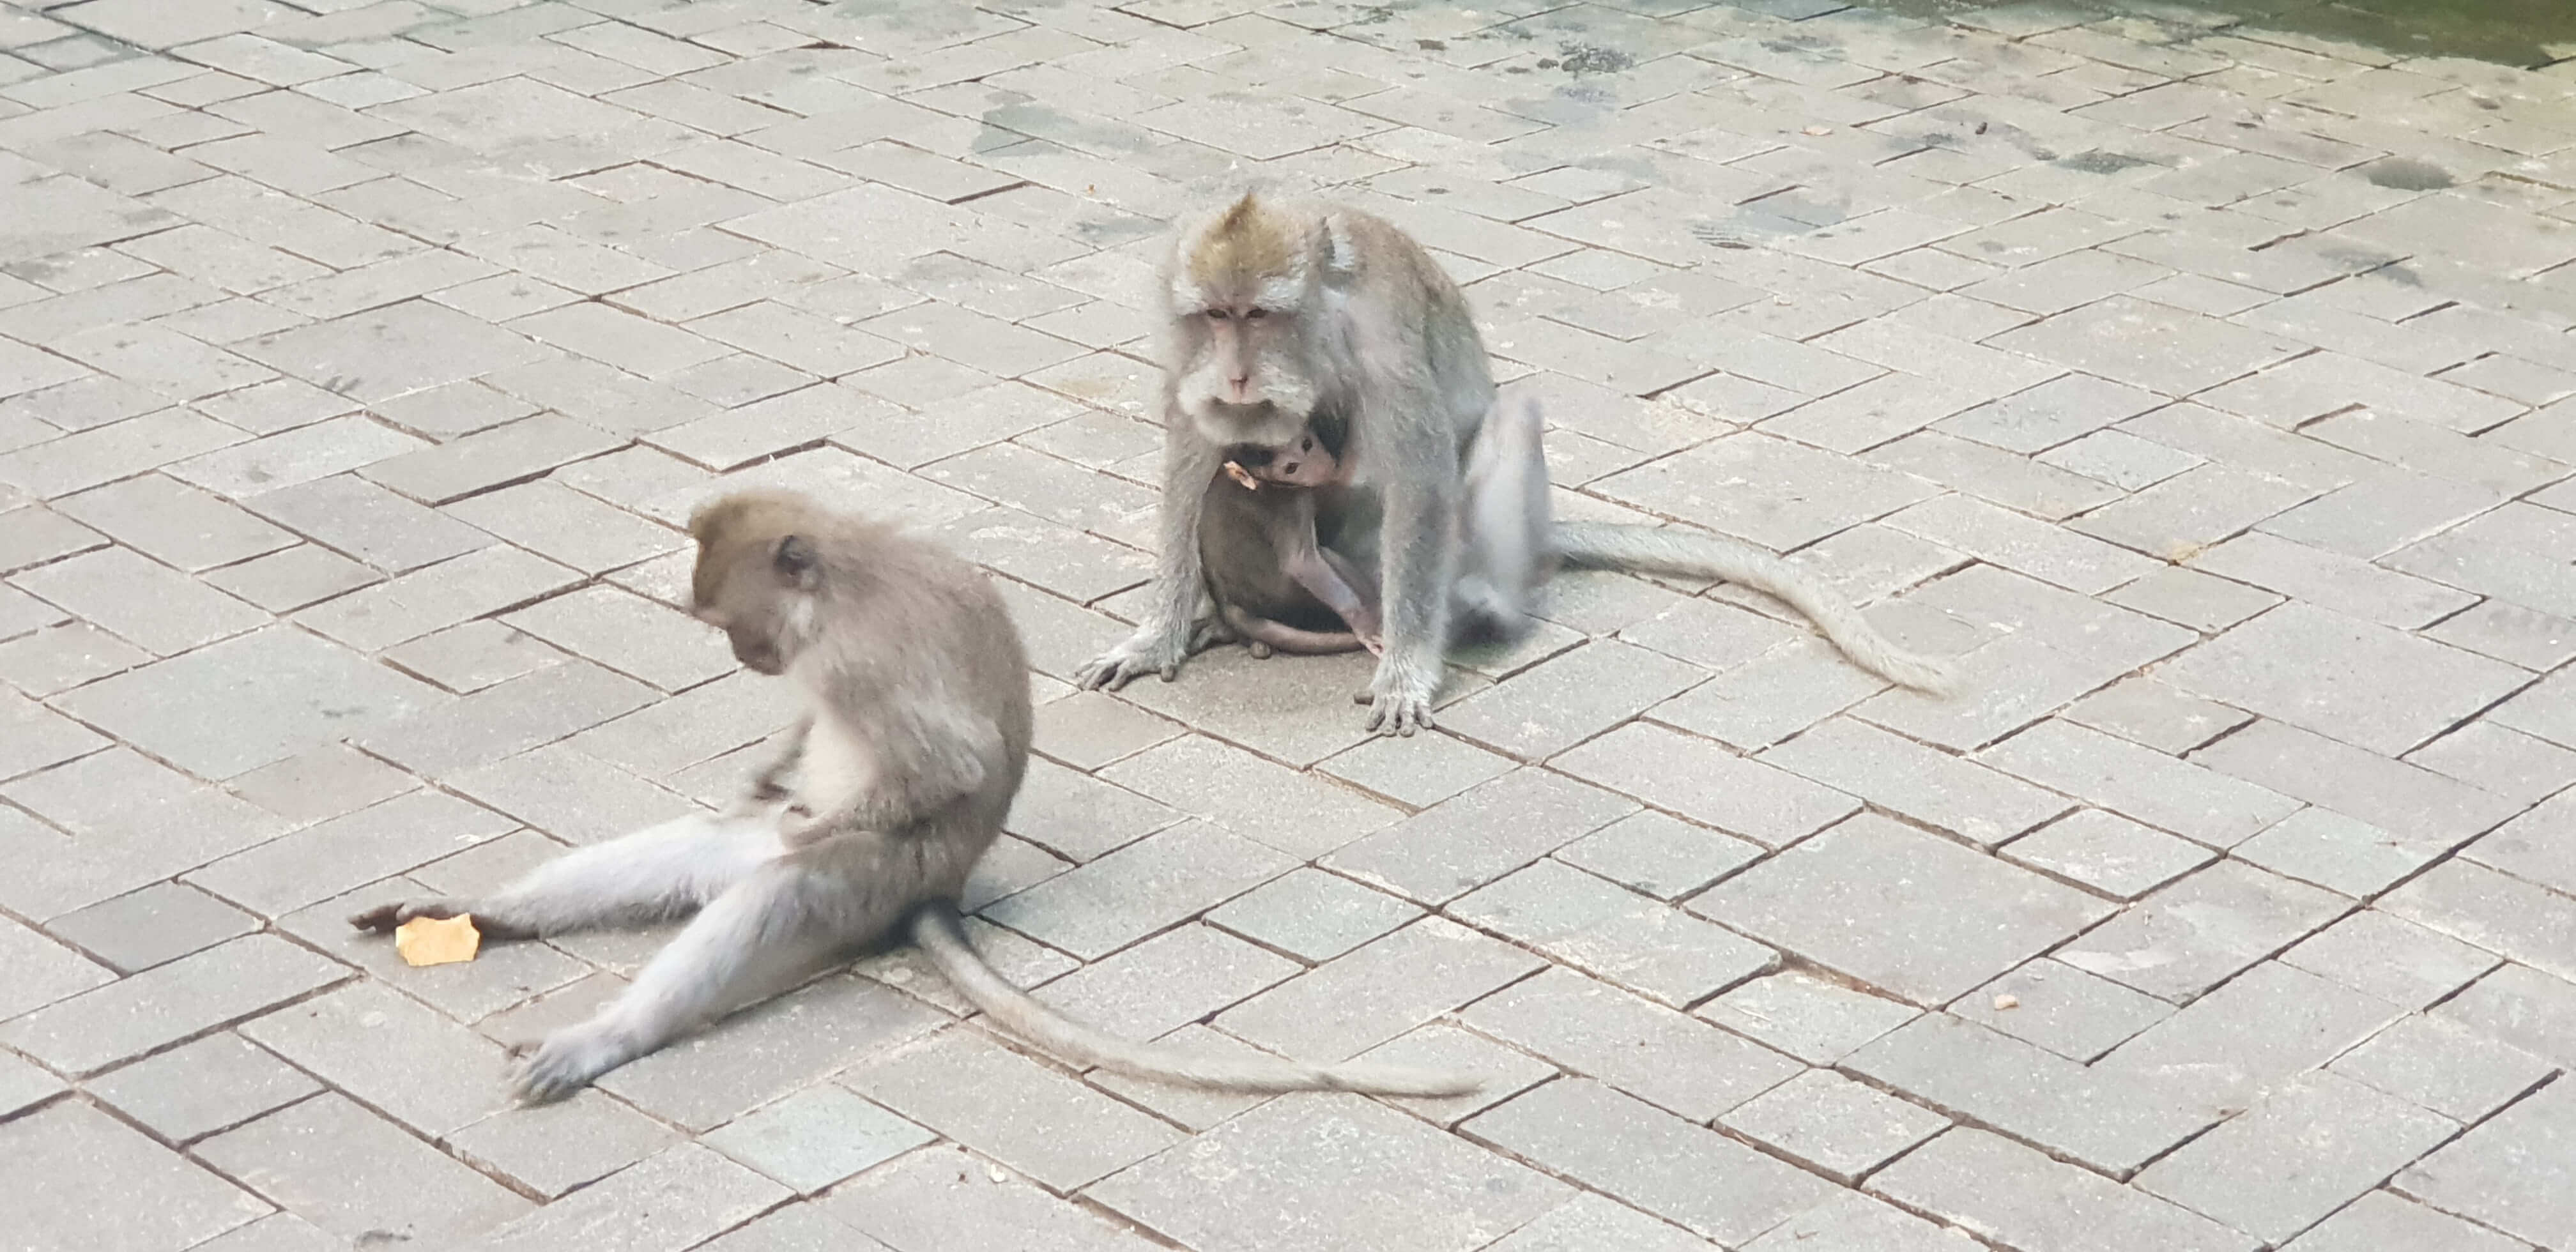 You can spot adorable baby monkeys too but try avoiding eye contact with the monkeys